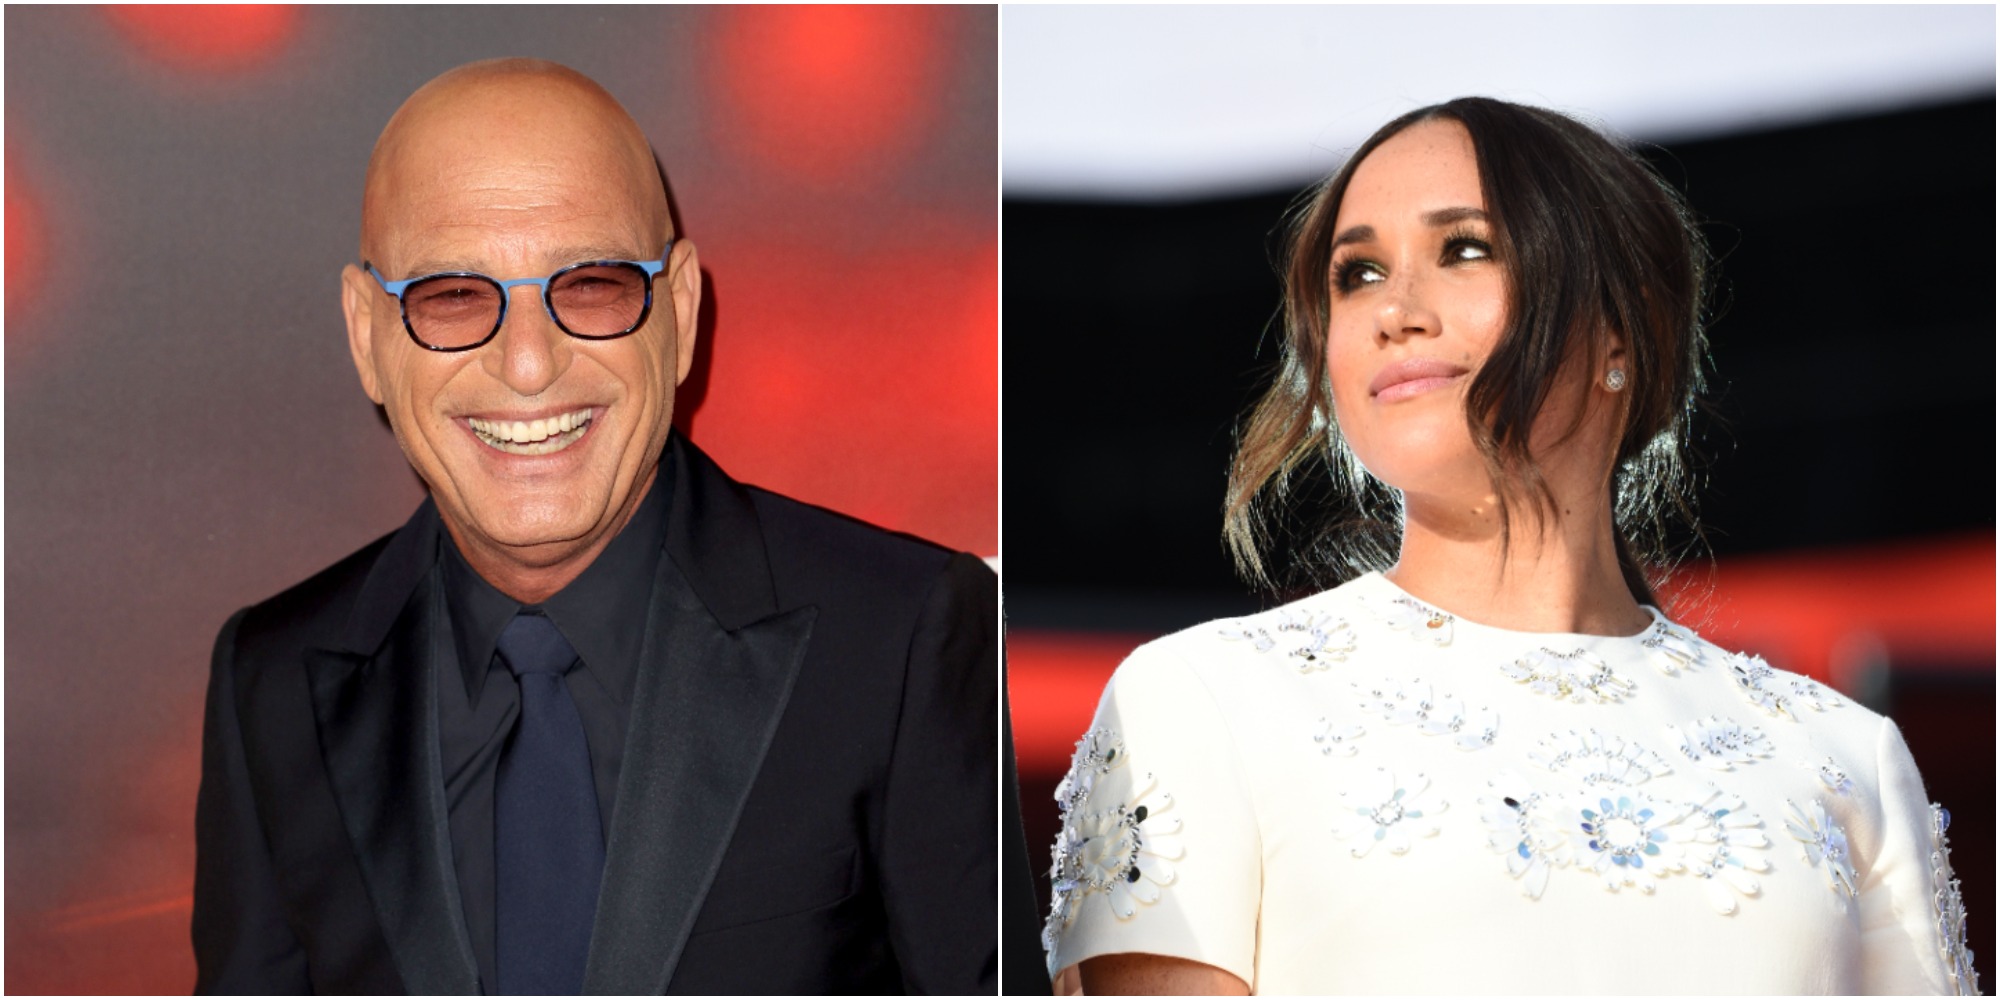 Howie Mandel and Meghan Markle worked together on "Deal or No Deal" before she married Prince Harry.